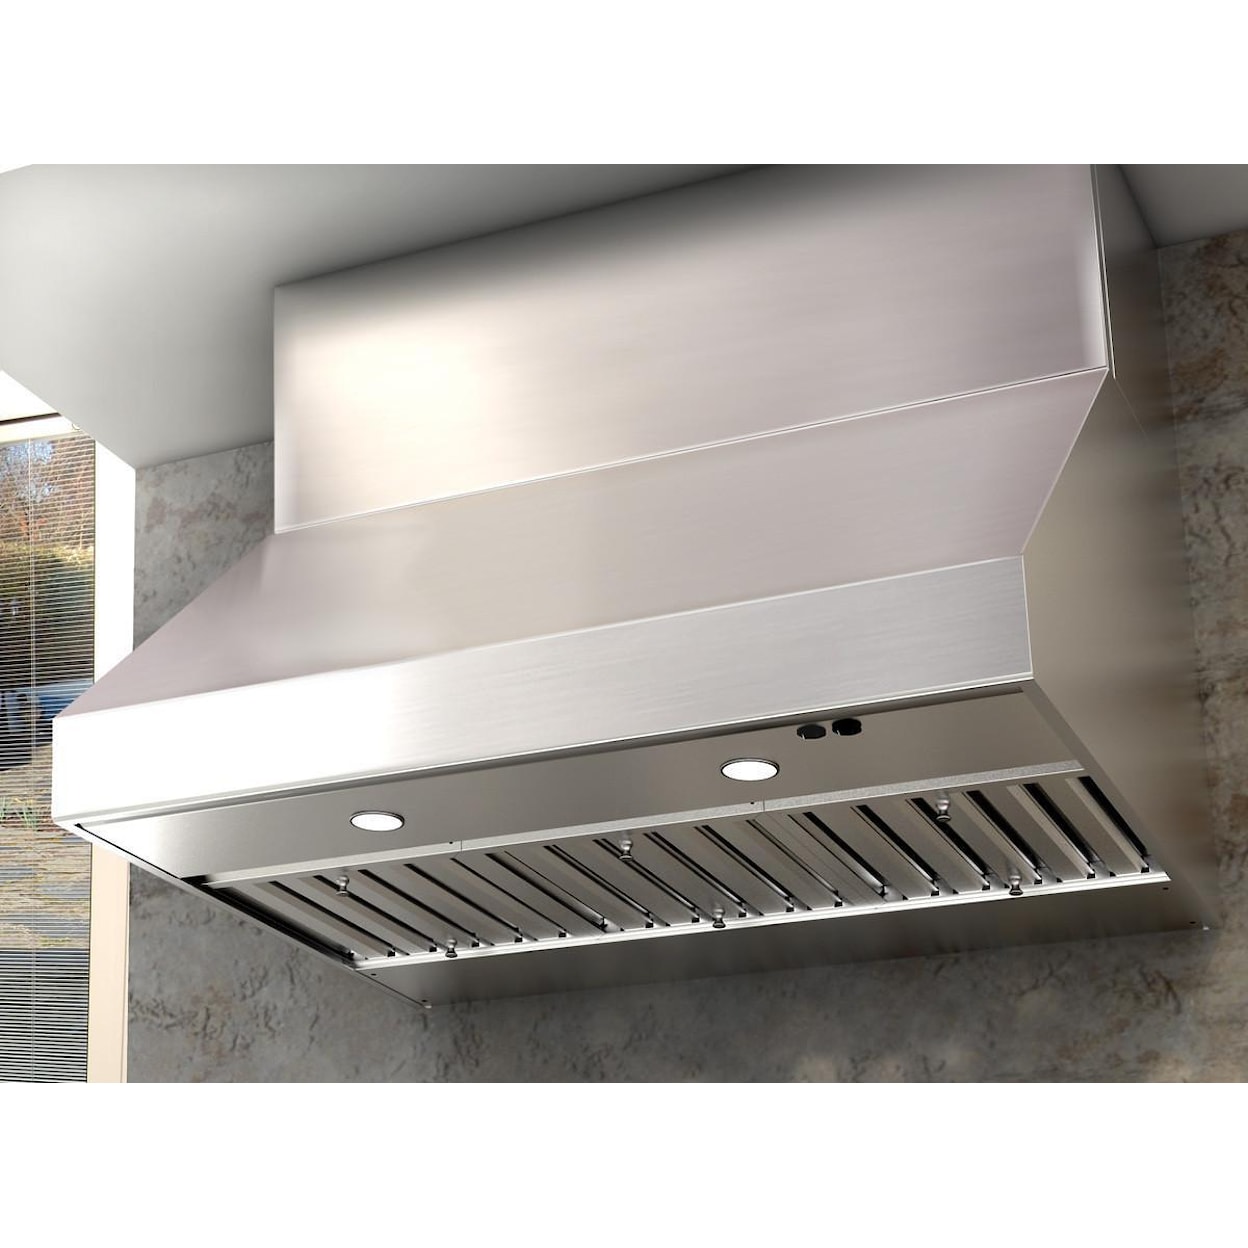 Zephyr Essentials Collection- Chimney Wall and Downdraft 42" Wall-Mount Range Hood 